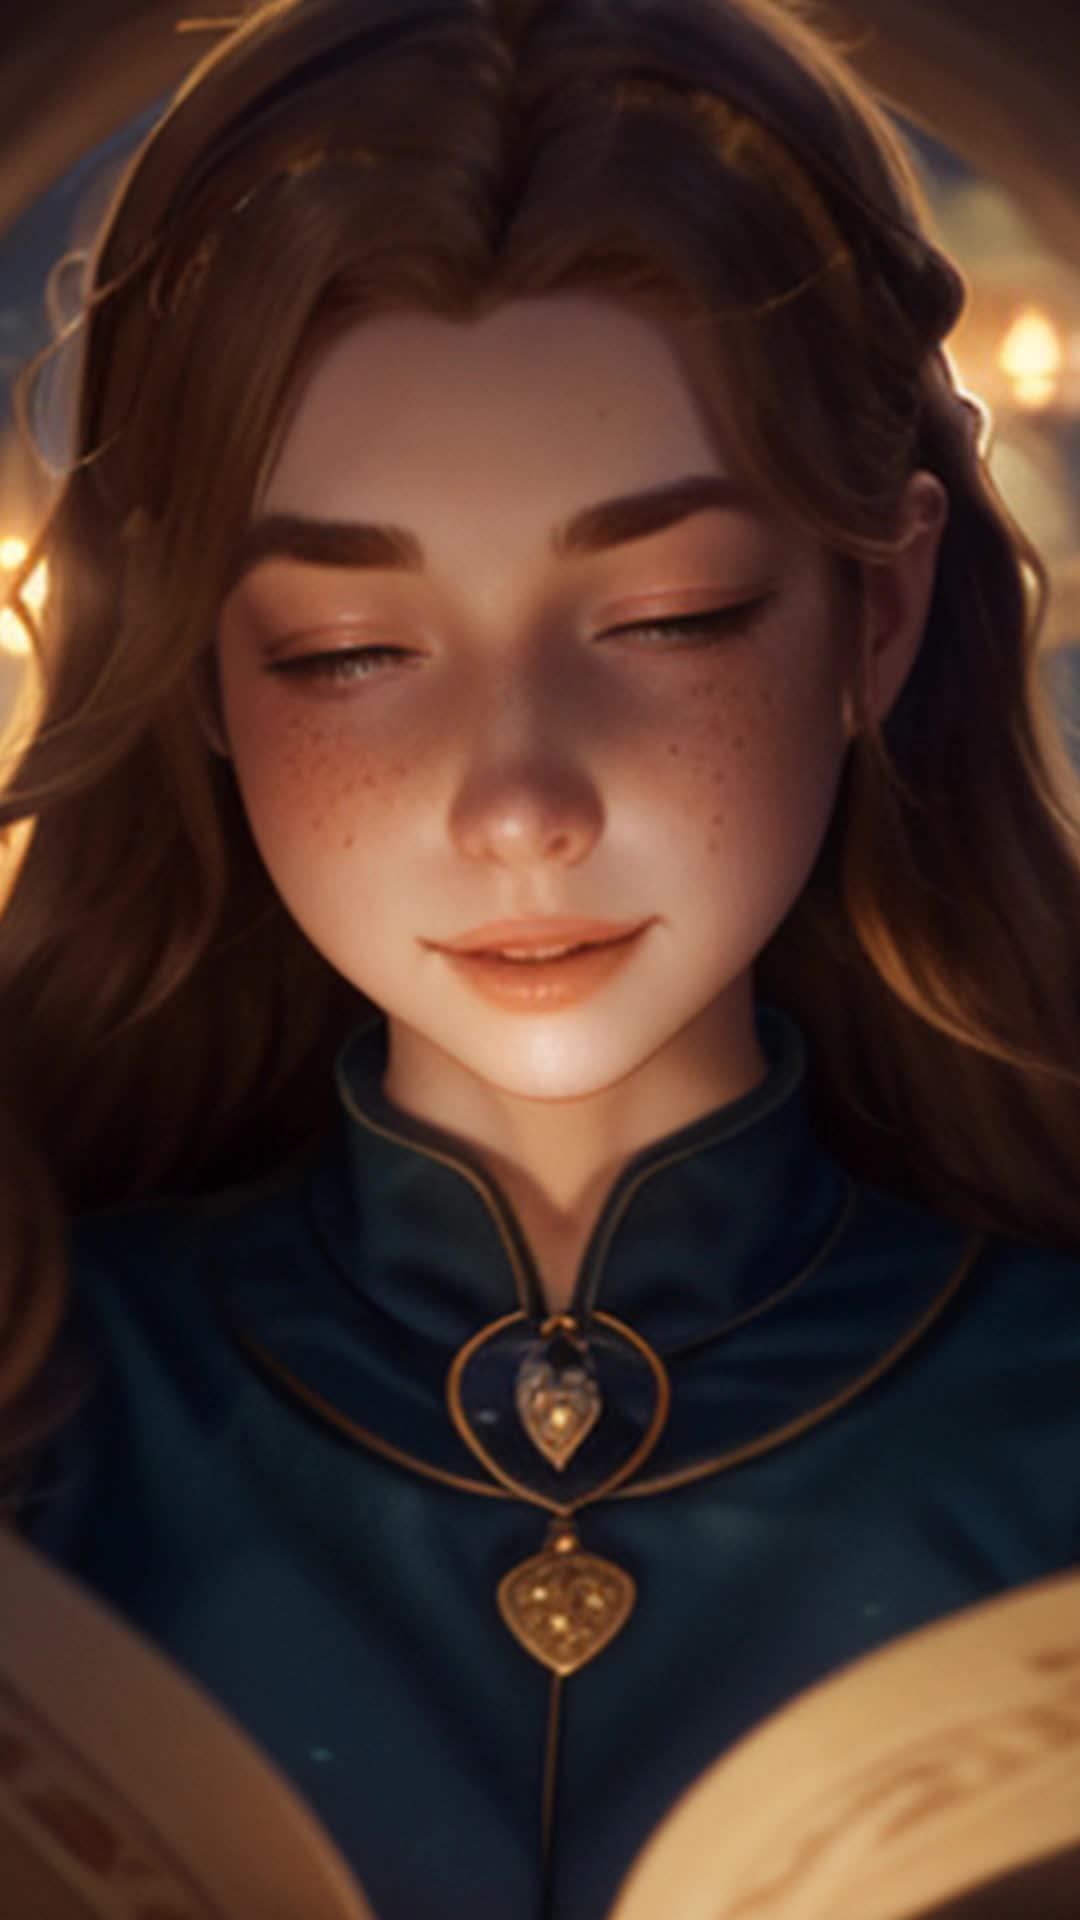 Ella's triumphant expression under flickering stars as final sentence inked, heart racing, eyes bright, surrounded by dim, warm lantern light, beautifully crafted journal pages glowing, medieval fantasy setting, victory in serene night, detailed and sharp focus, soft shadows